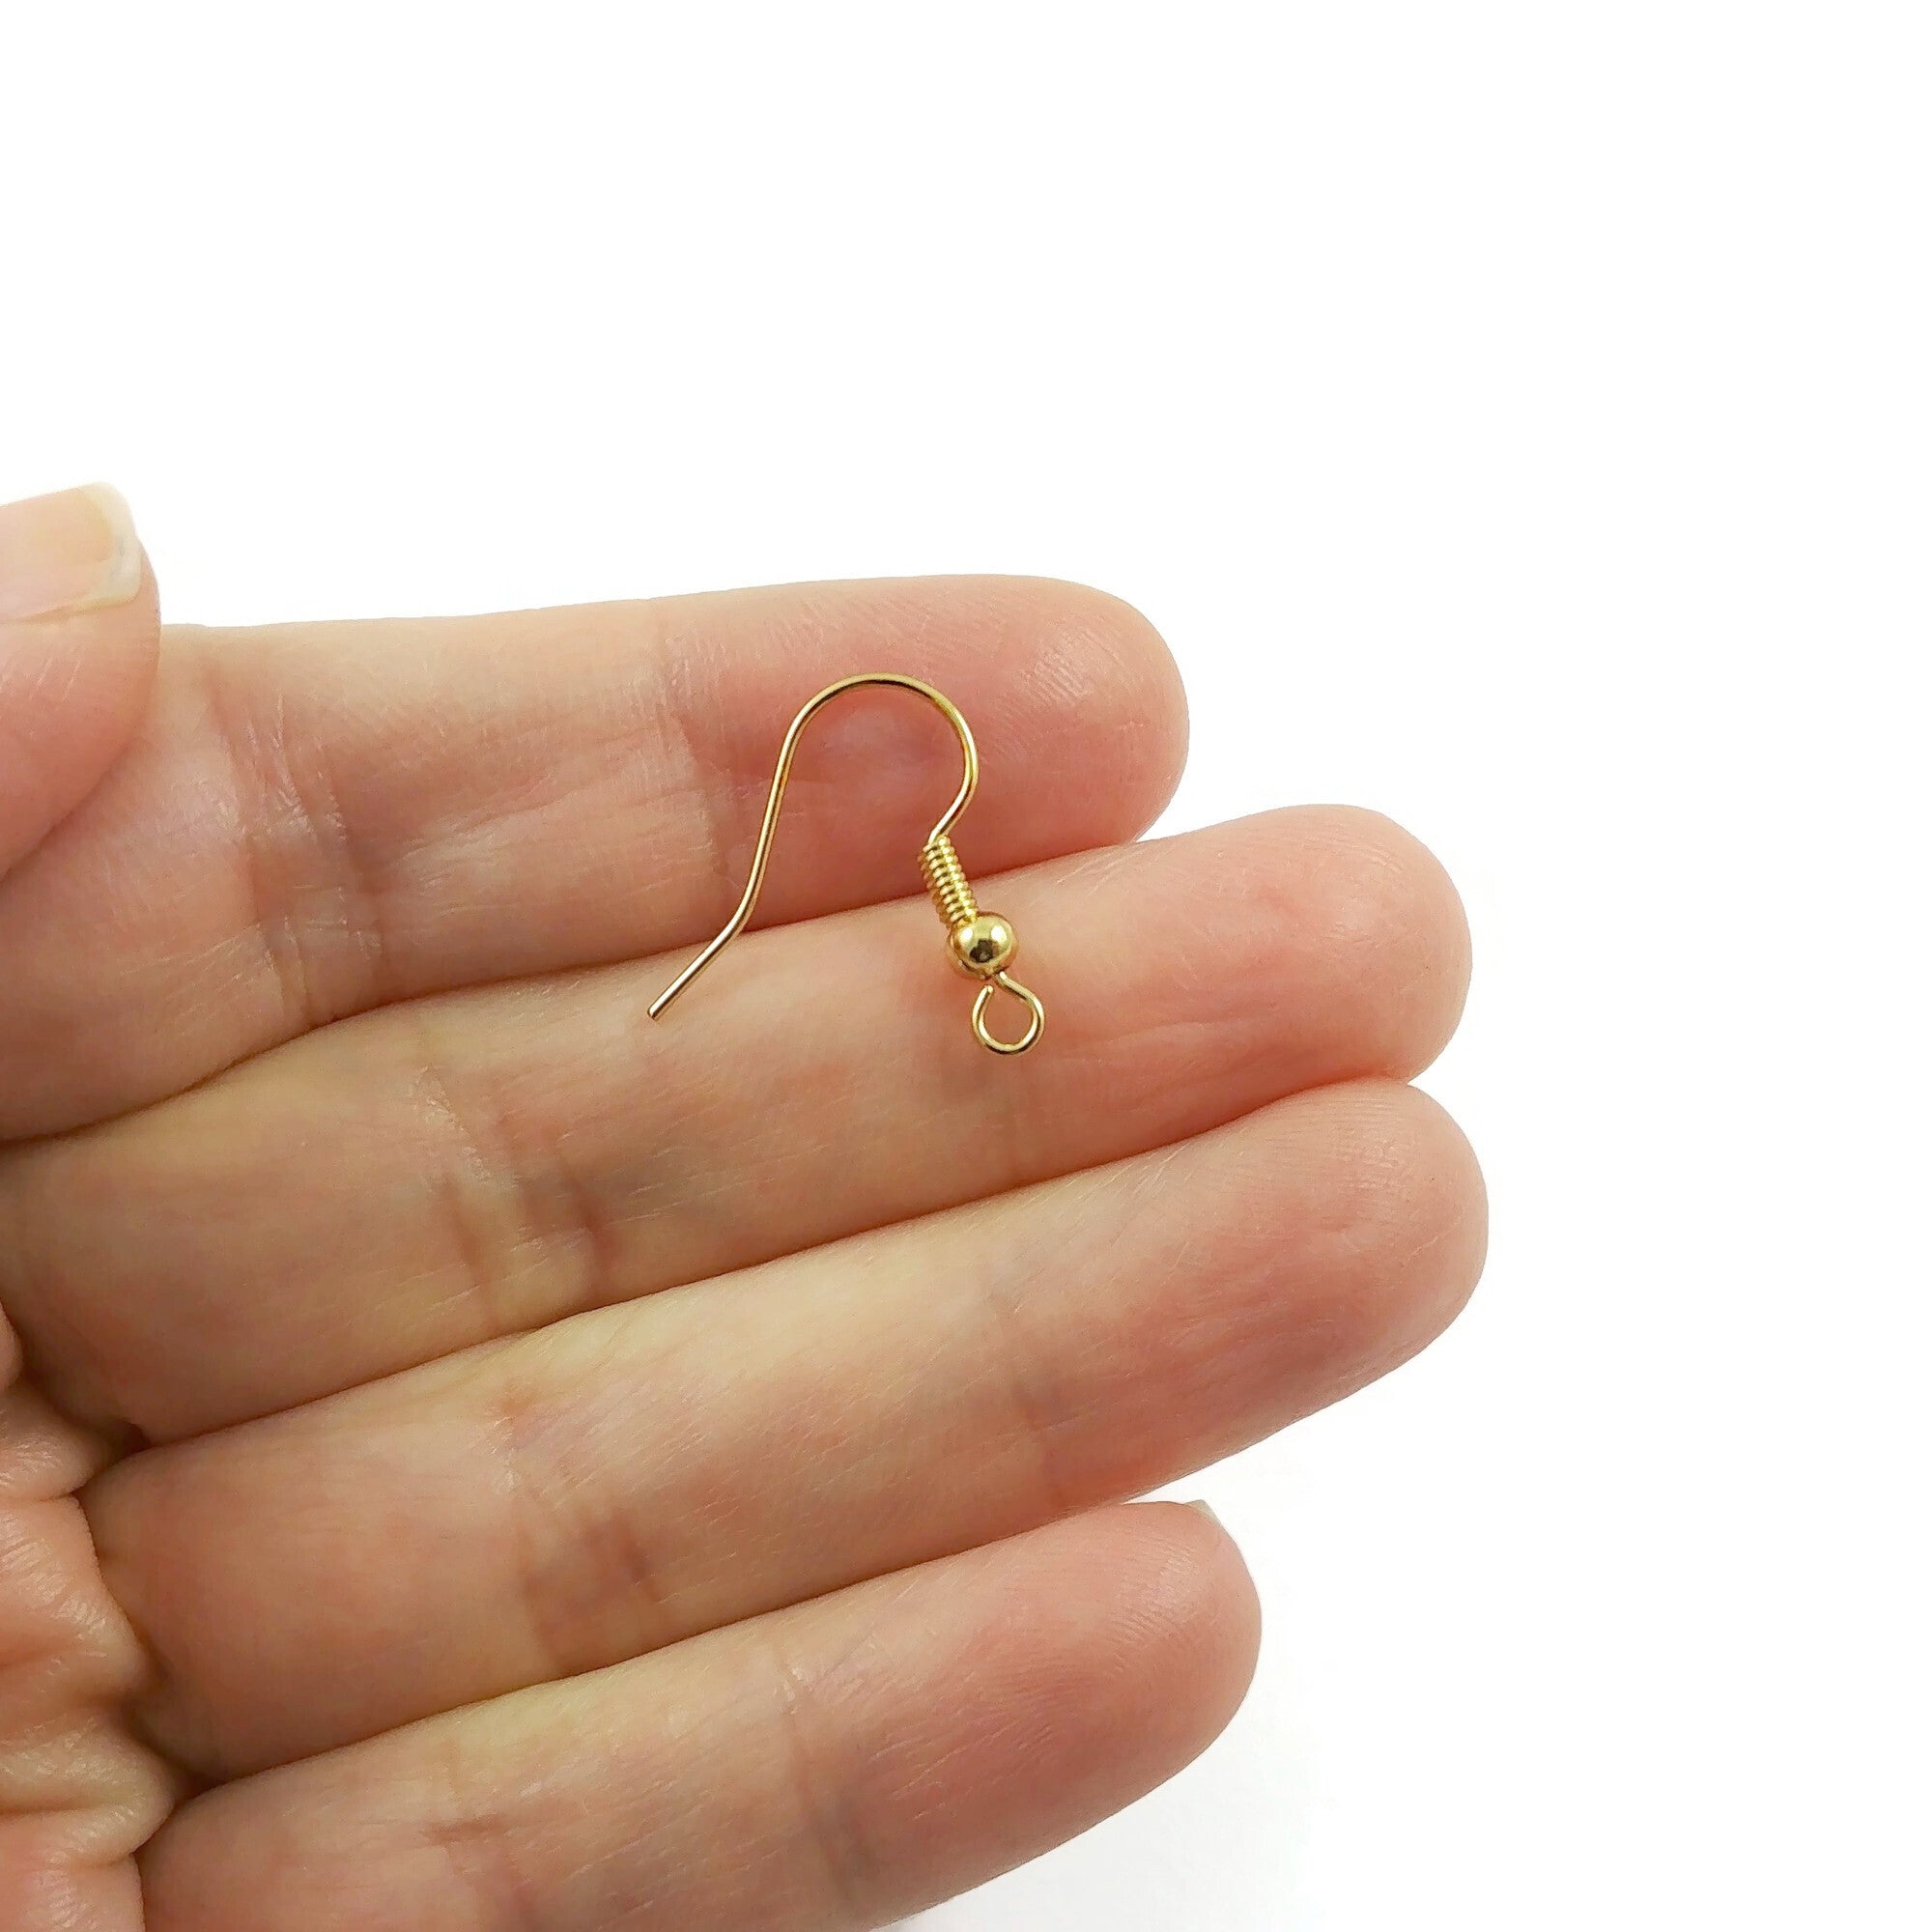 10 Brass earring hooks - Real 18K Gold Plated - Nickel free, lead free and cadmium free earwire